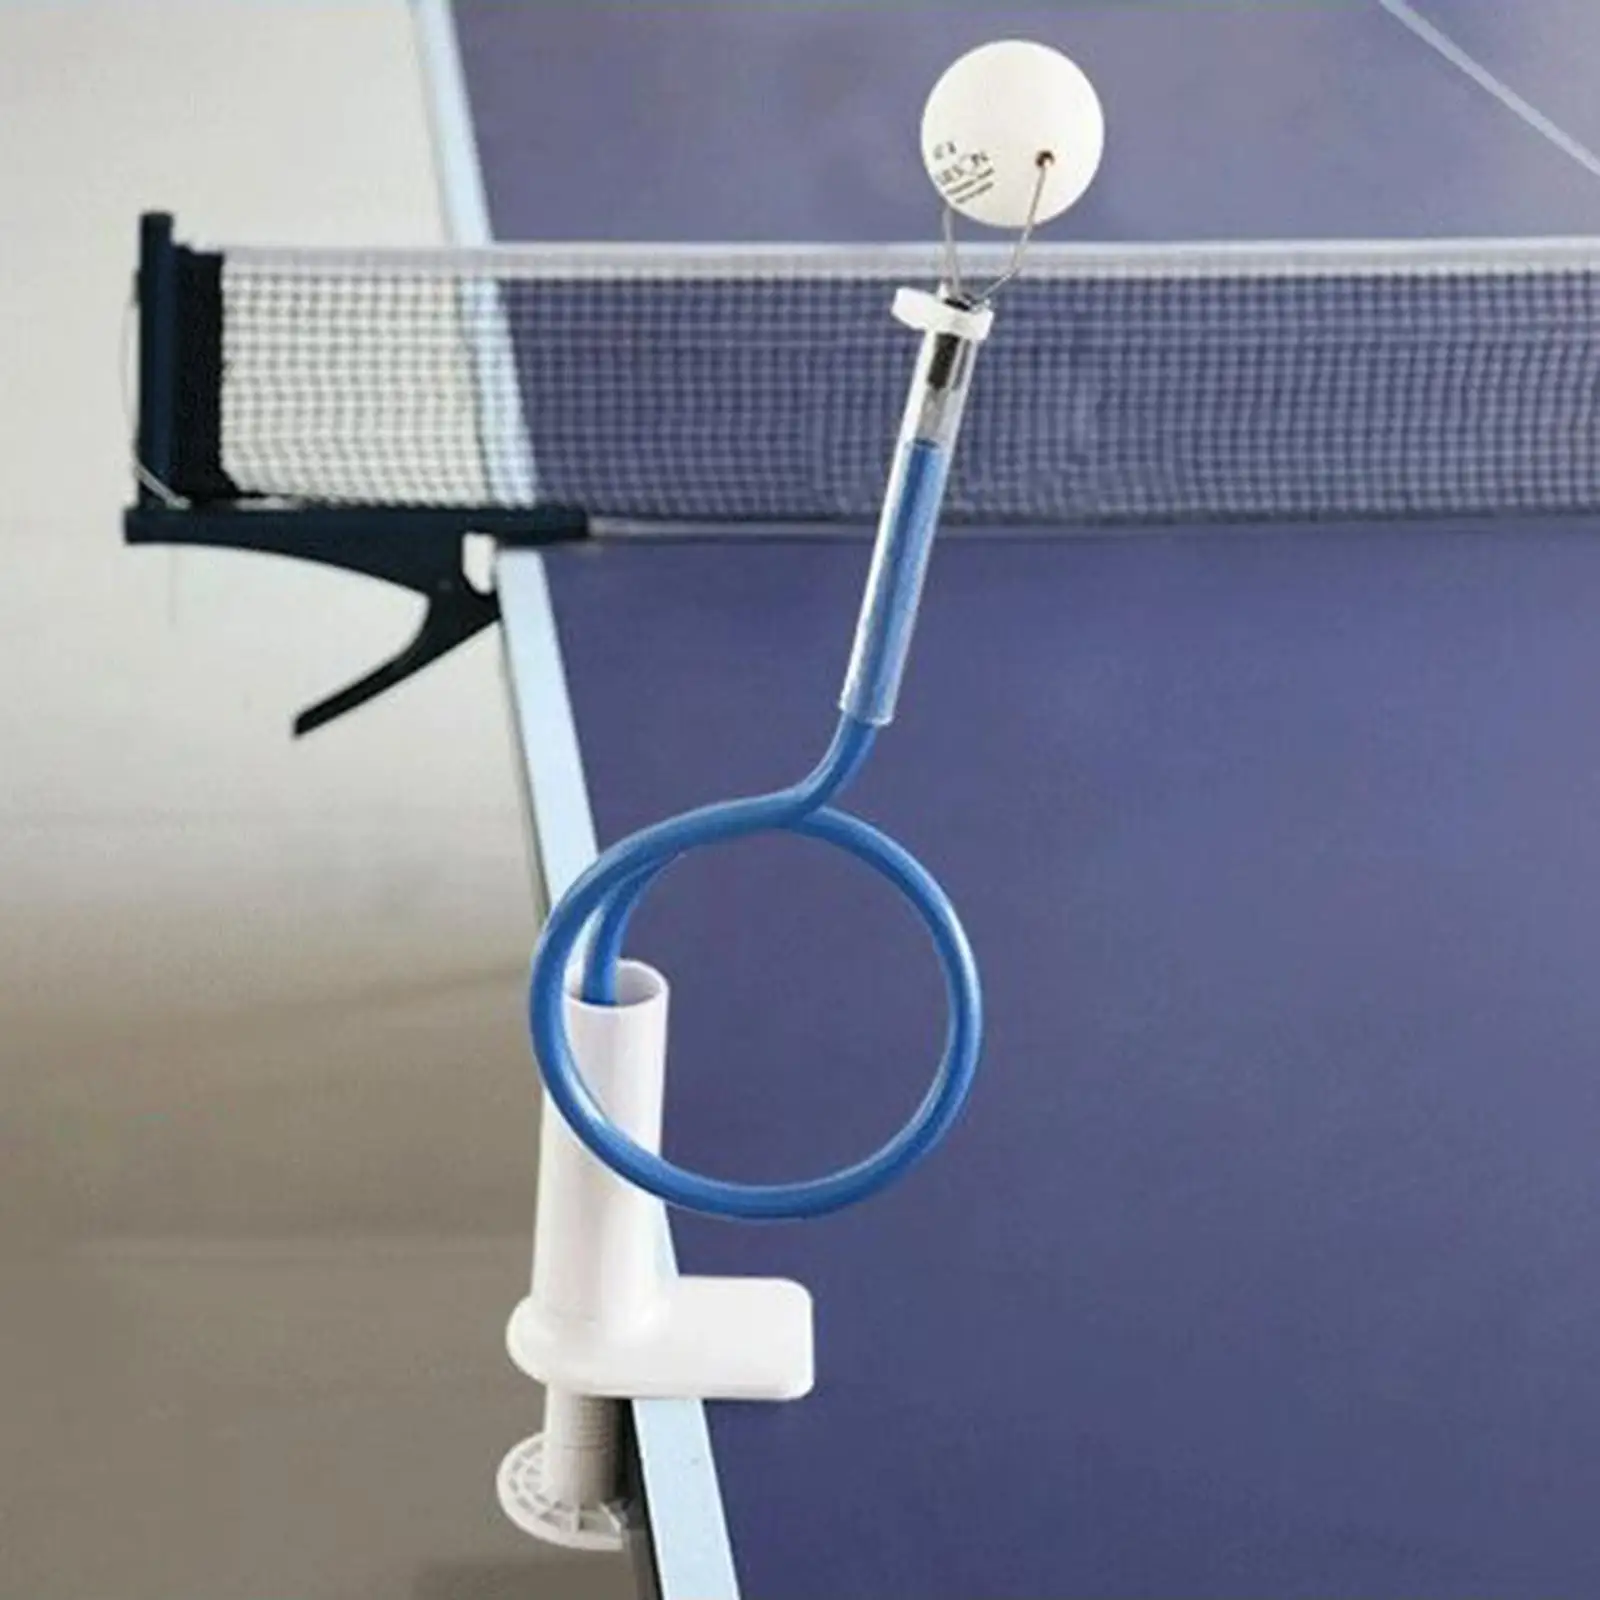 Table Tennis Fixed Flexible Stable Clamp Training for Indoor Stroking Action